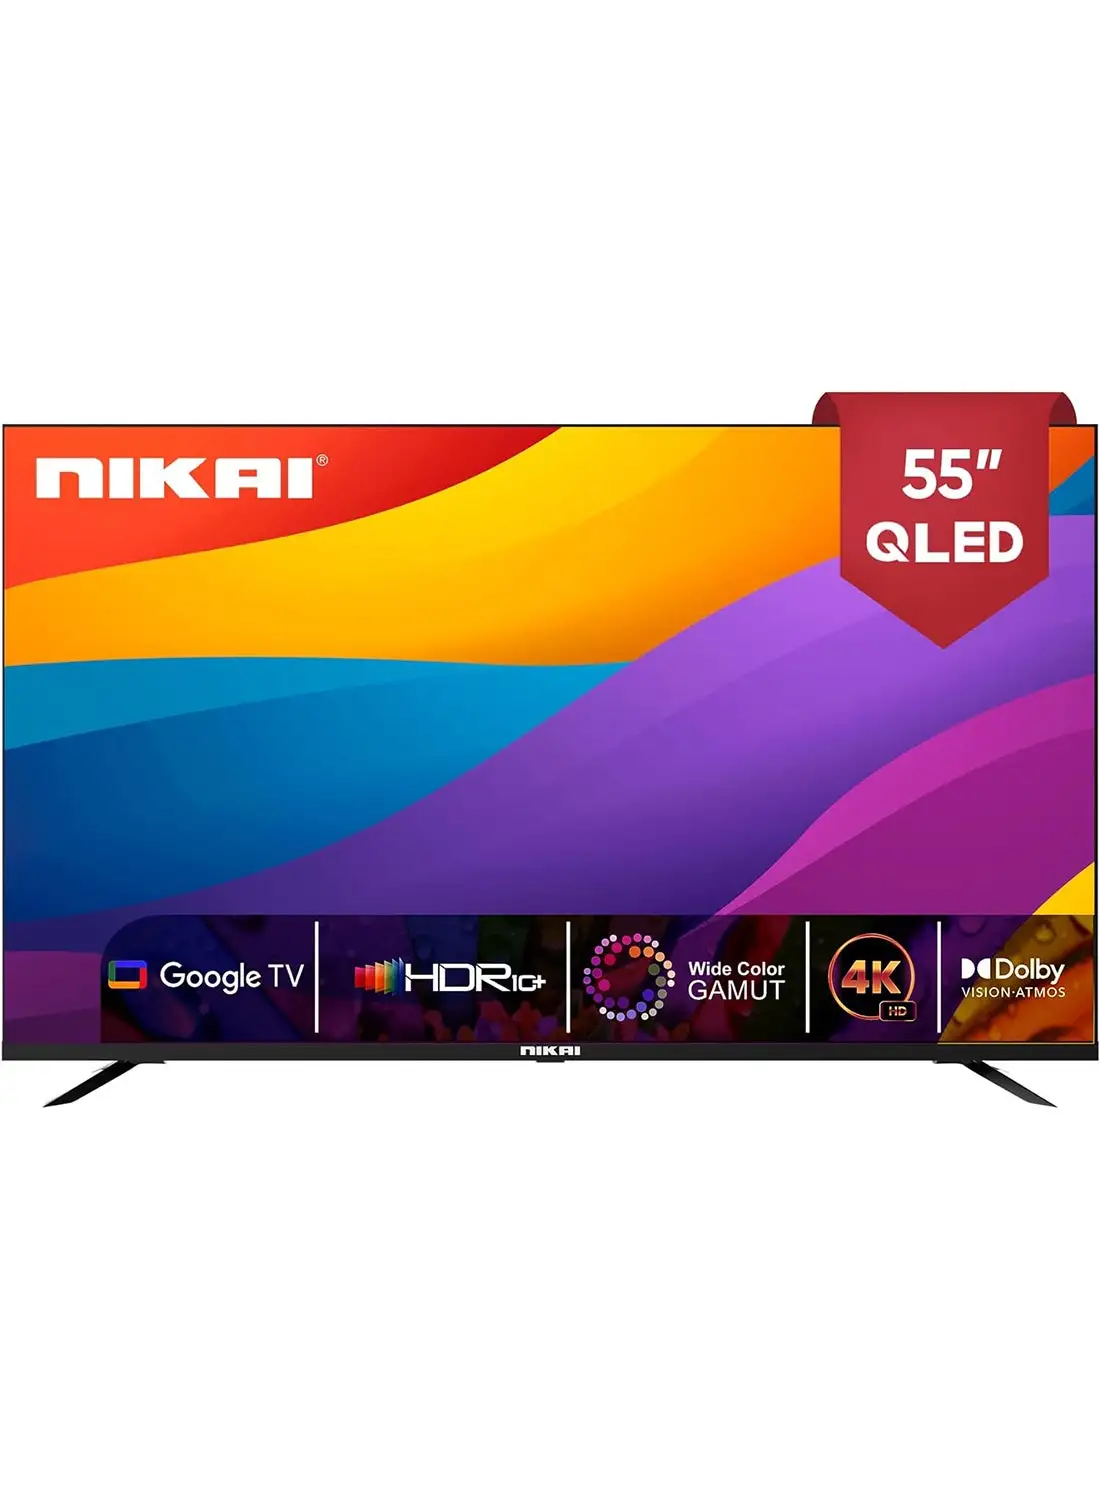 NIKAI Pro 55 Inch QLED 4K Smart Google TV, Andrioid TV OS, Voice Search, Youtube, Netflix, Shahid, Wide Color Gamut, 3860x2160 Pixels, HDR10+, Dolby Atmos, ChromeCast Bulit-In NPROG55QLED Black